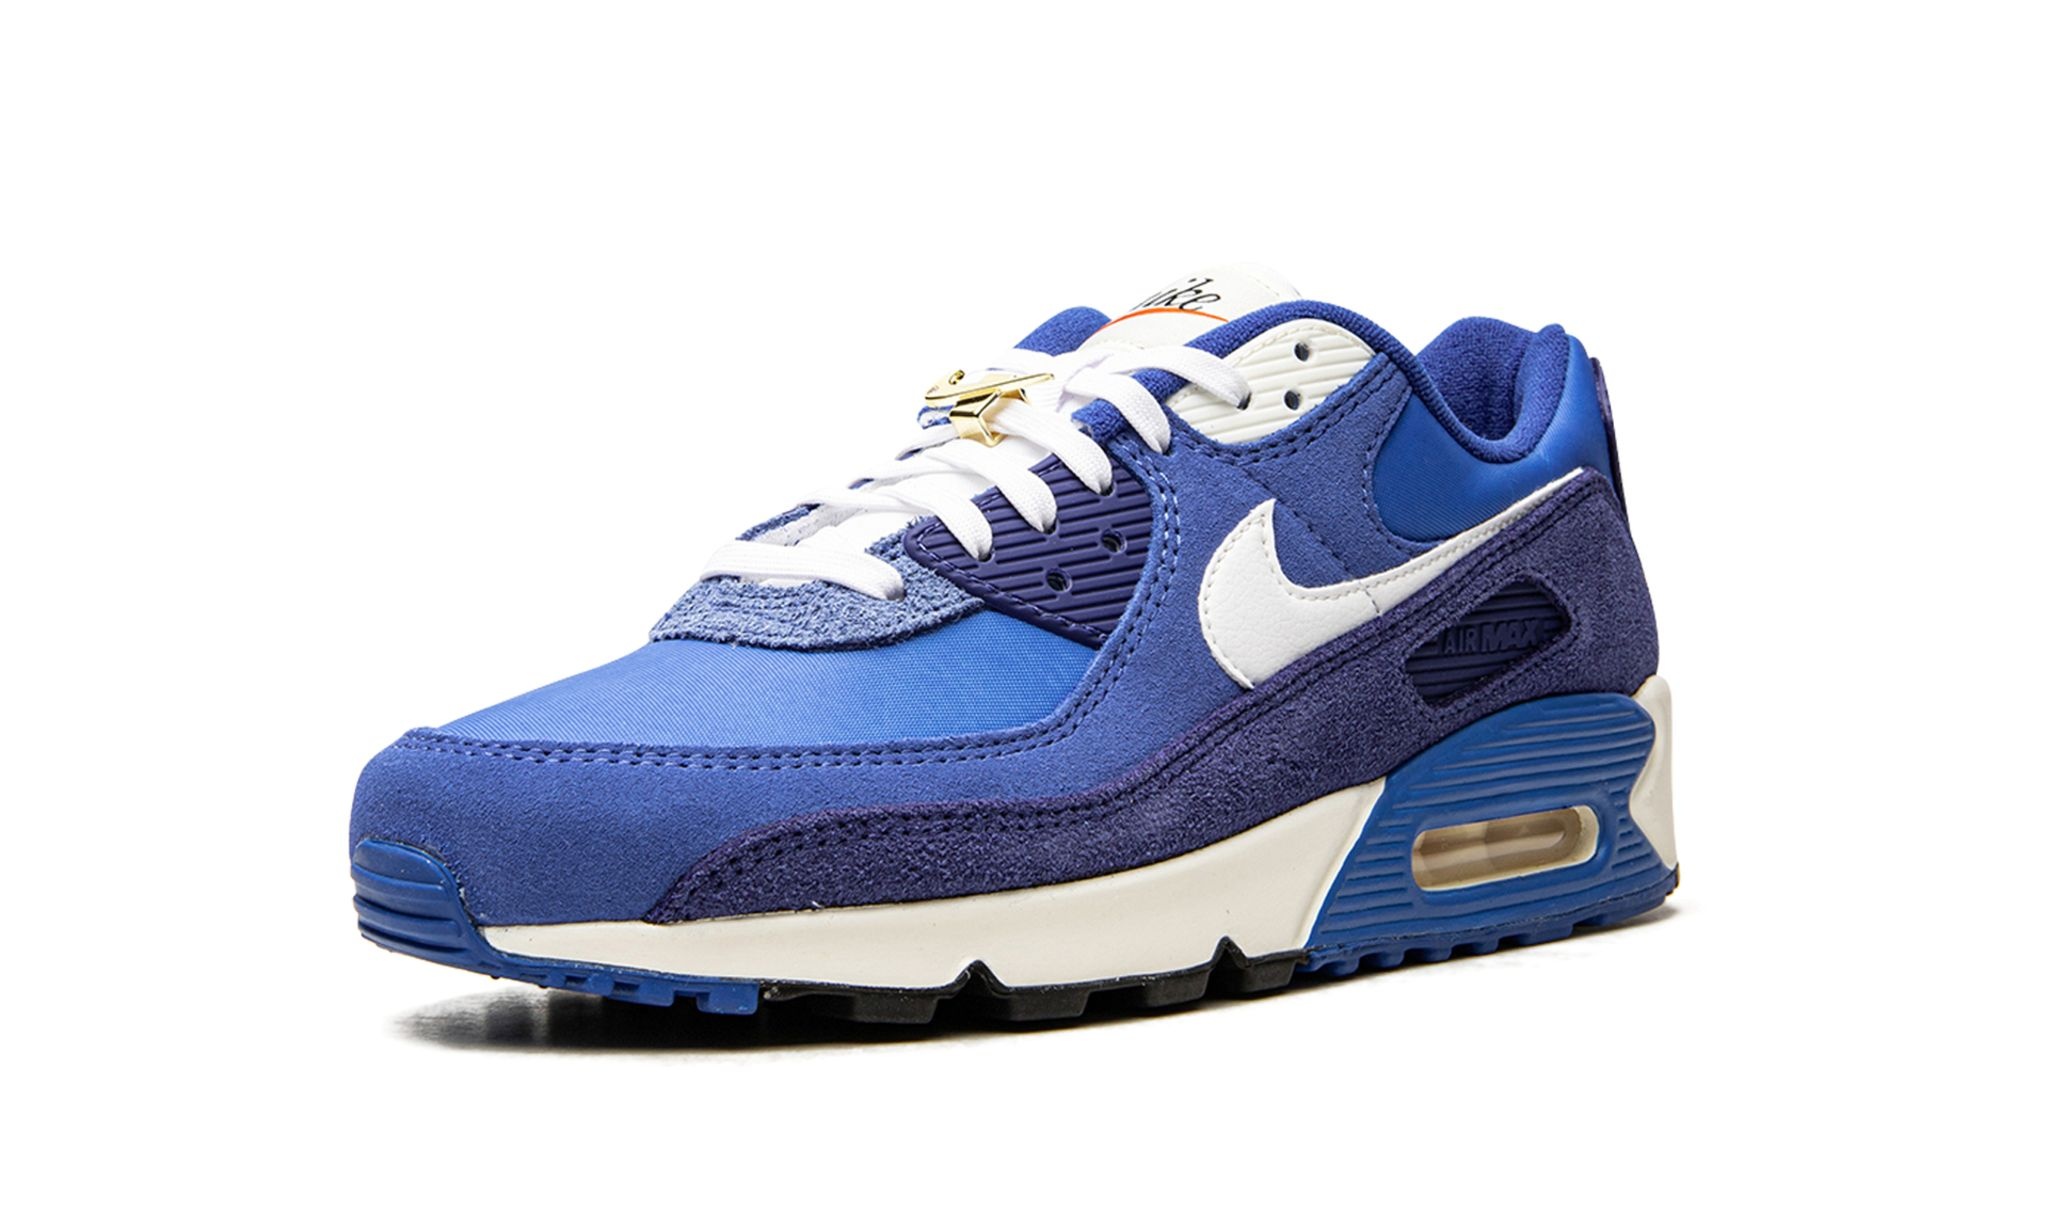 AIR MAX 90 SE "FIRST USE PACK - SIGNAL BLUE" - 4